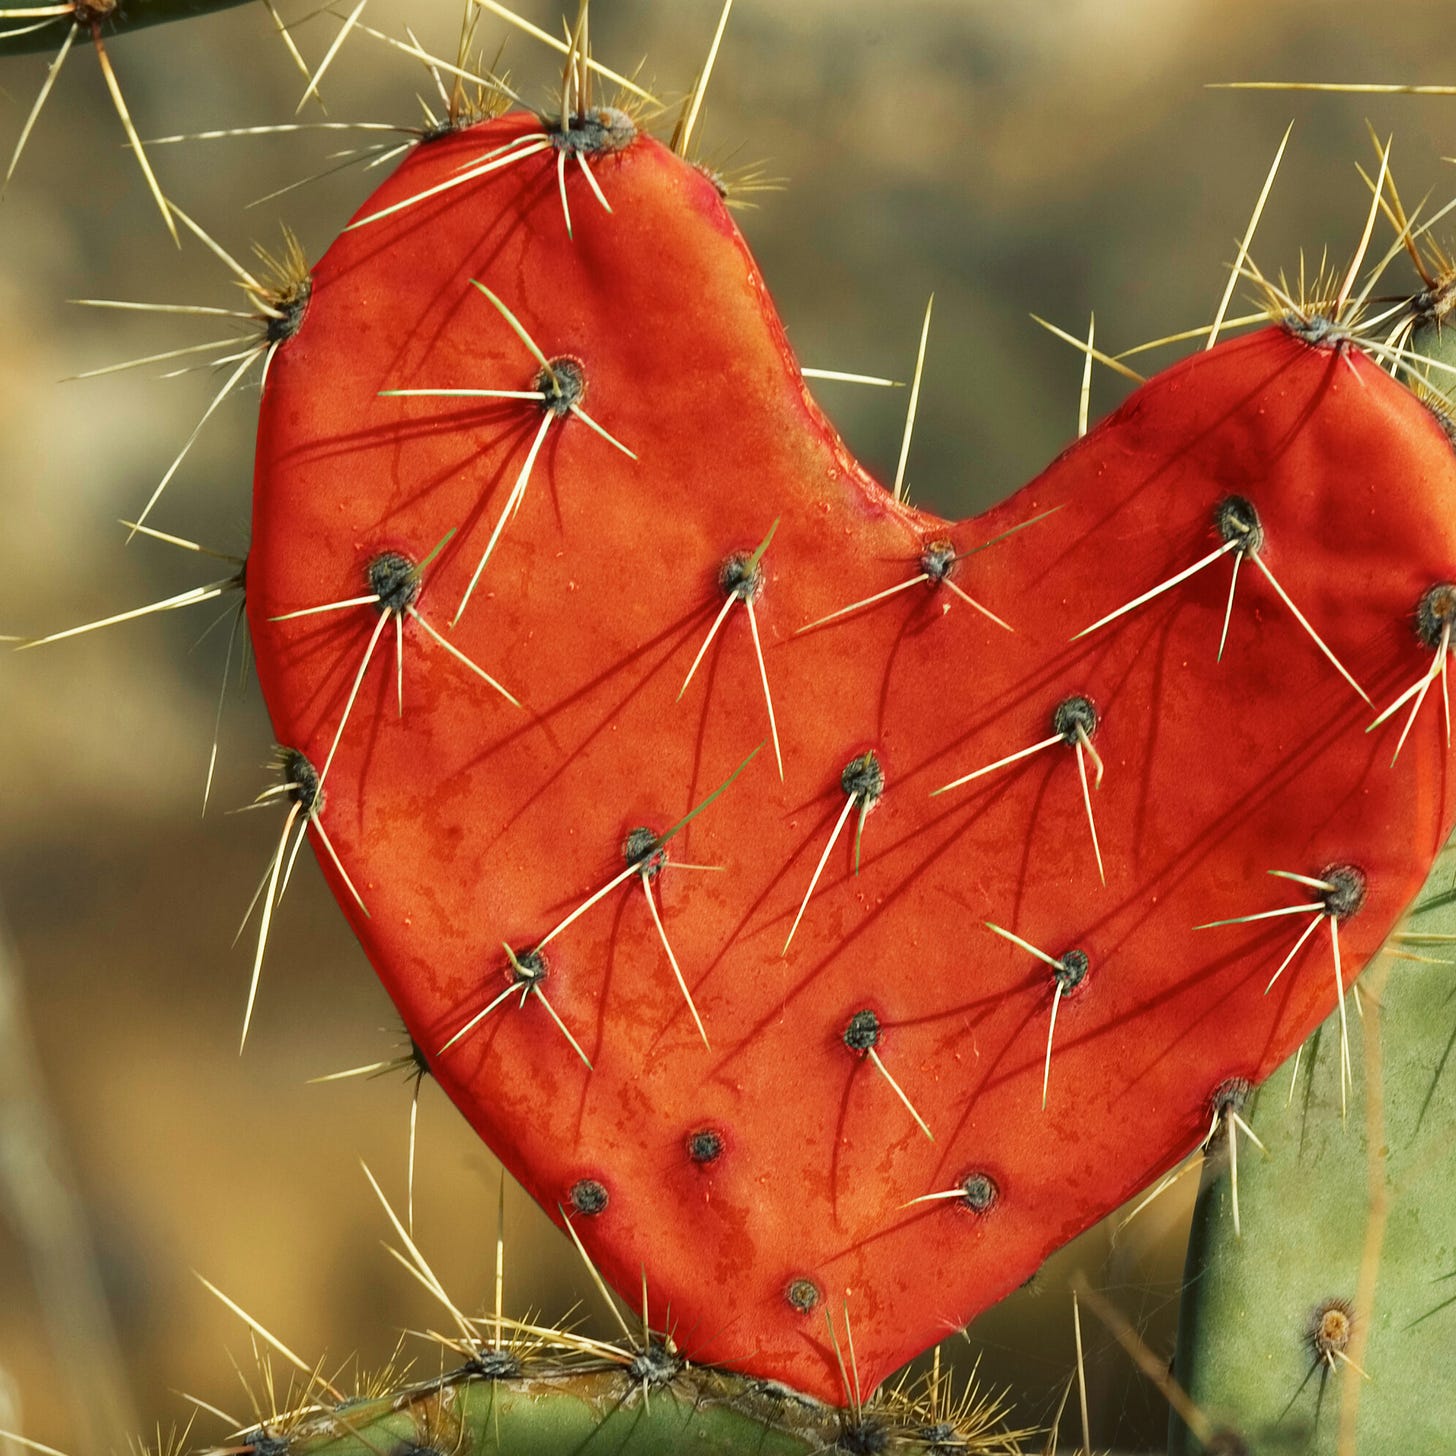 Red heart-shaped cactus full of needles